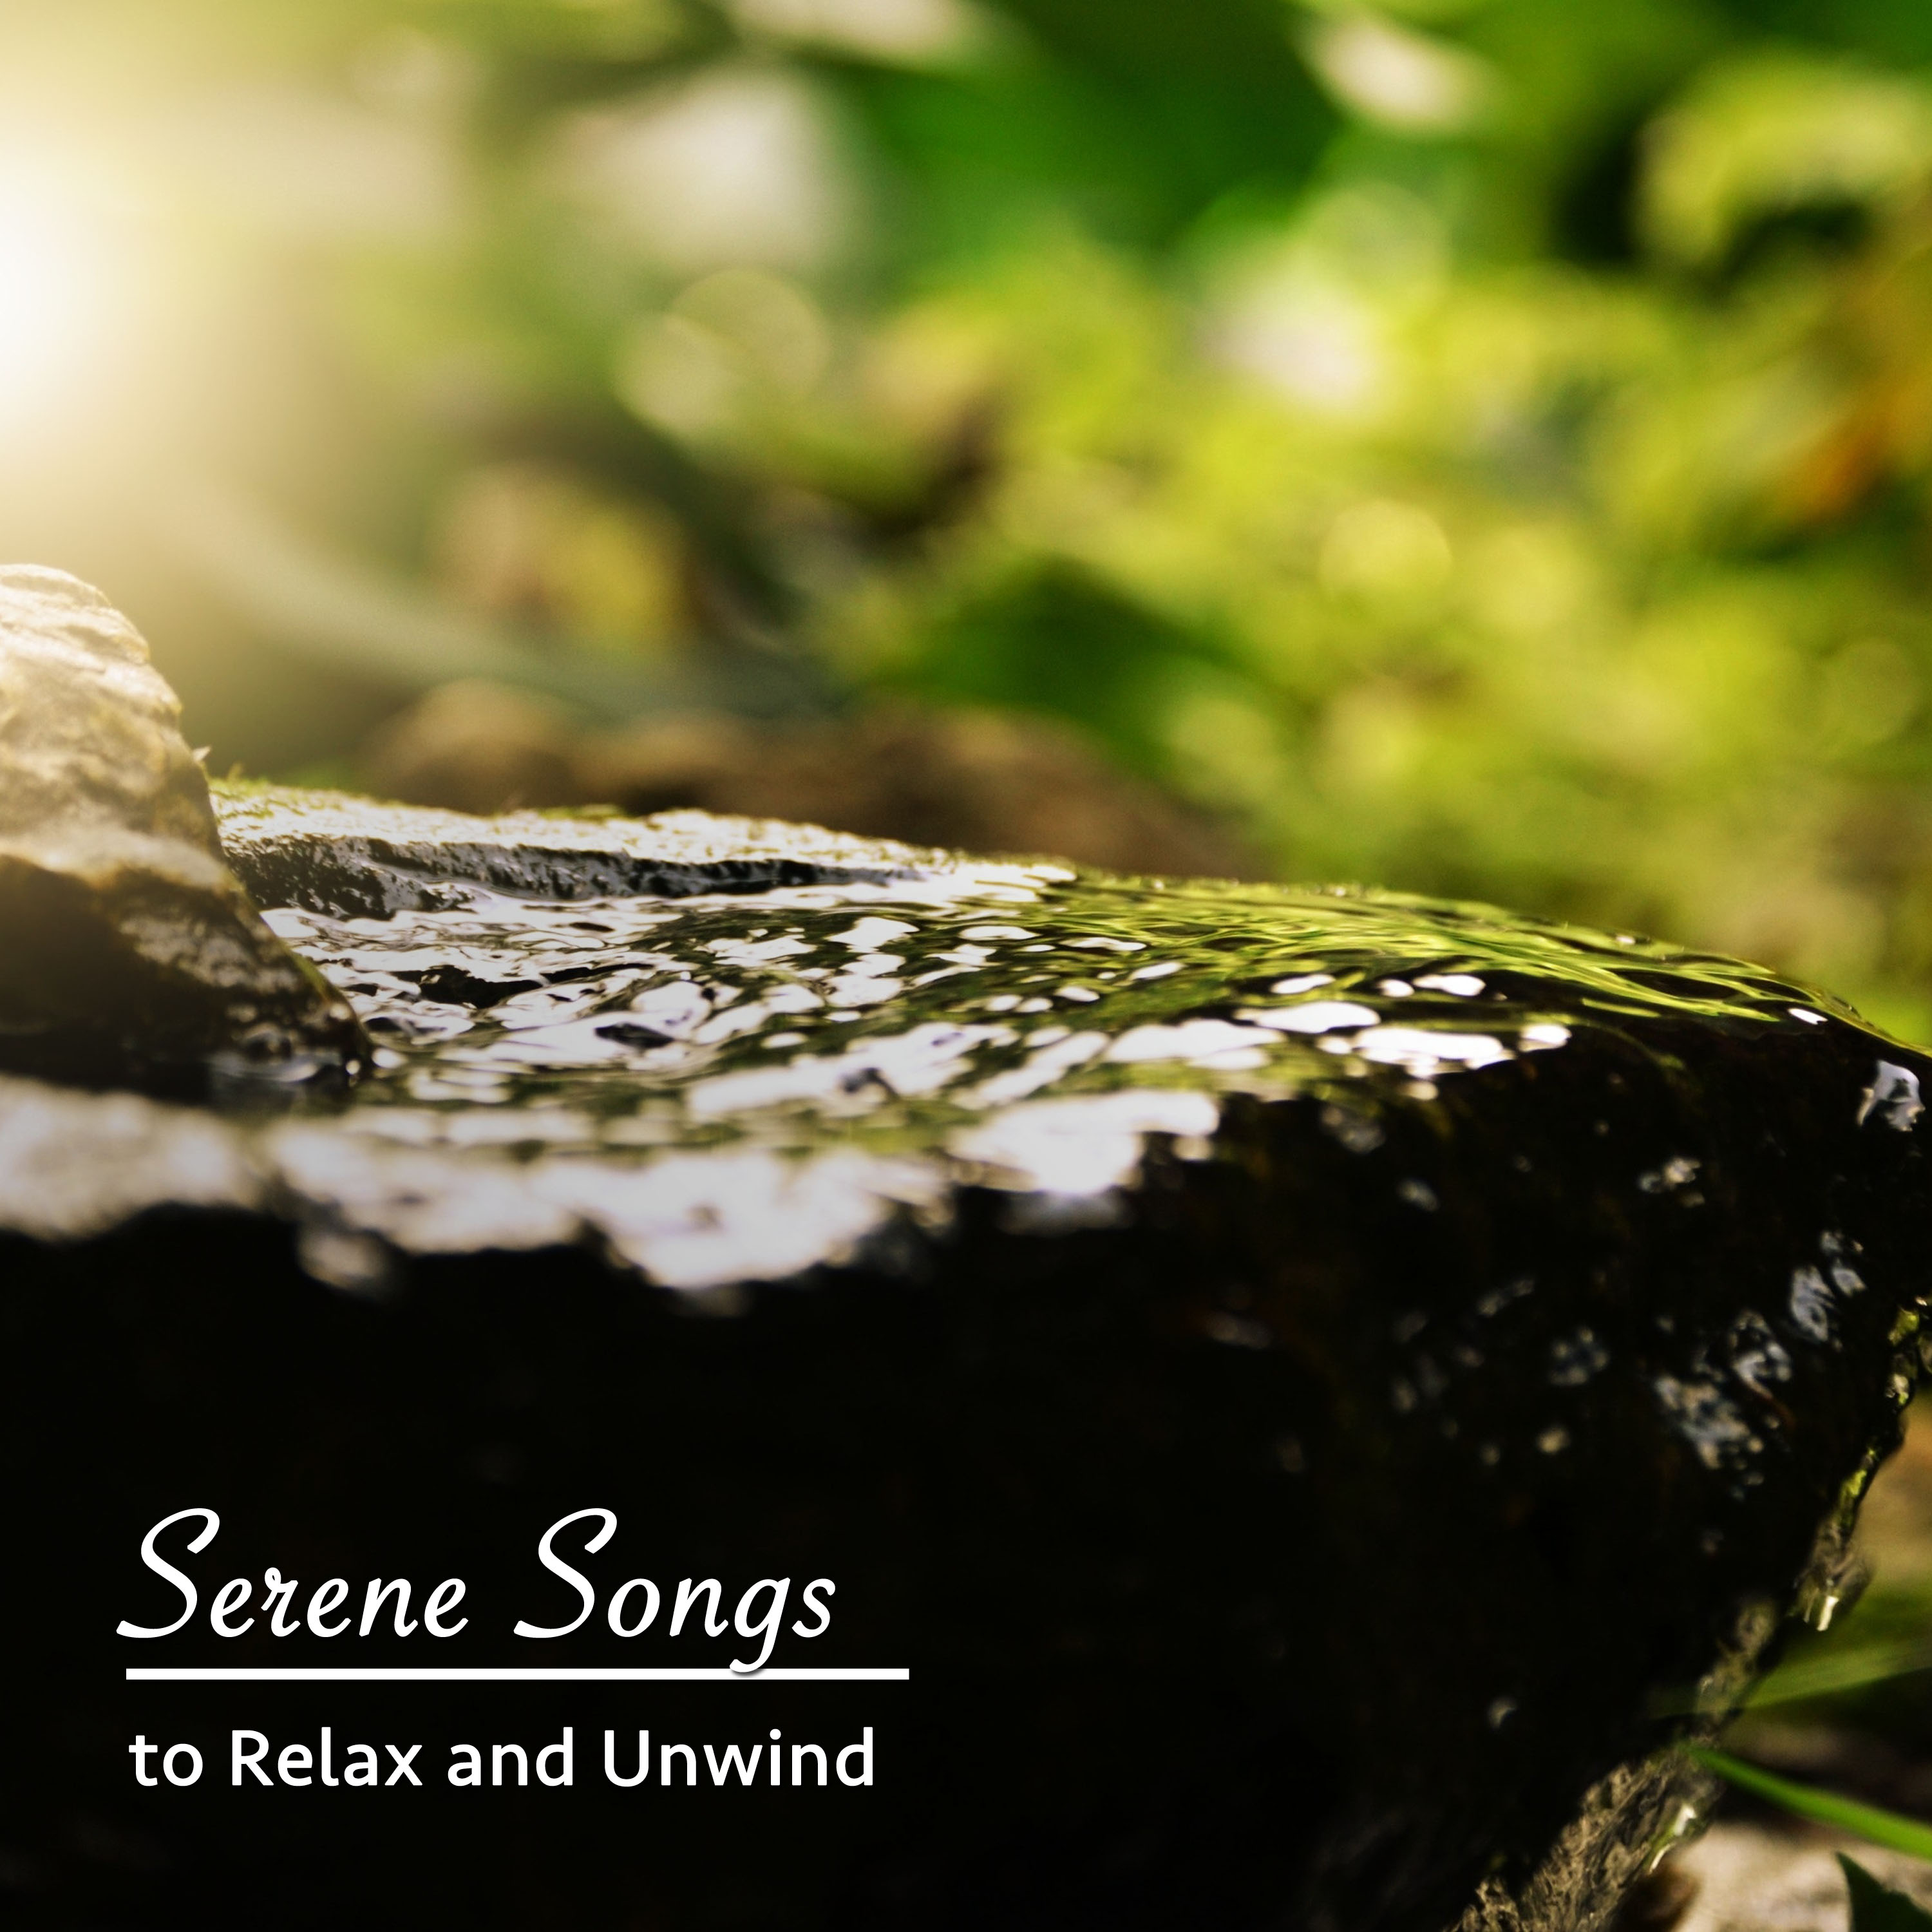 16 Serene Songs to Relax and Unwind